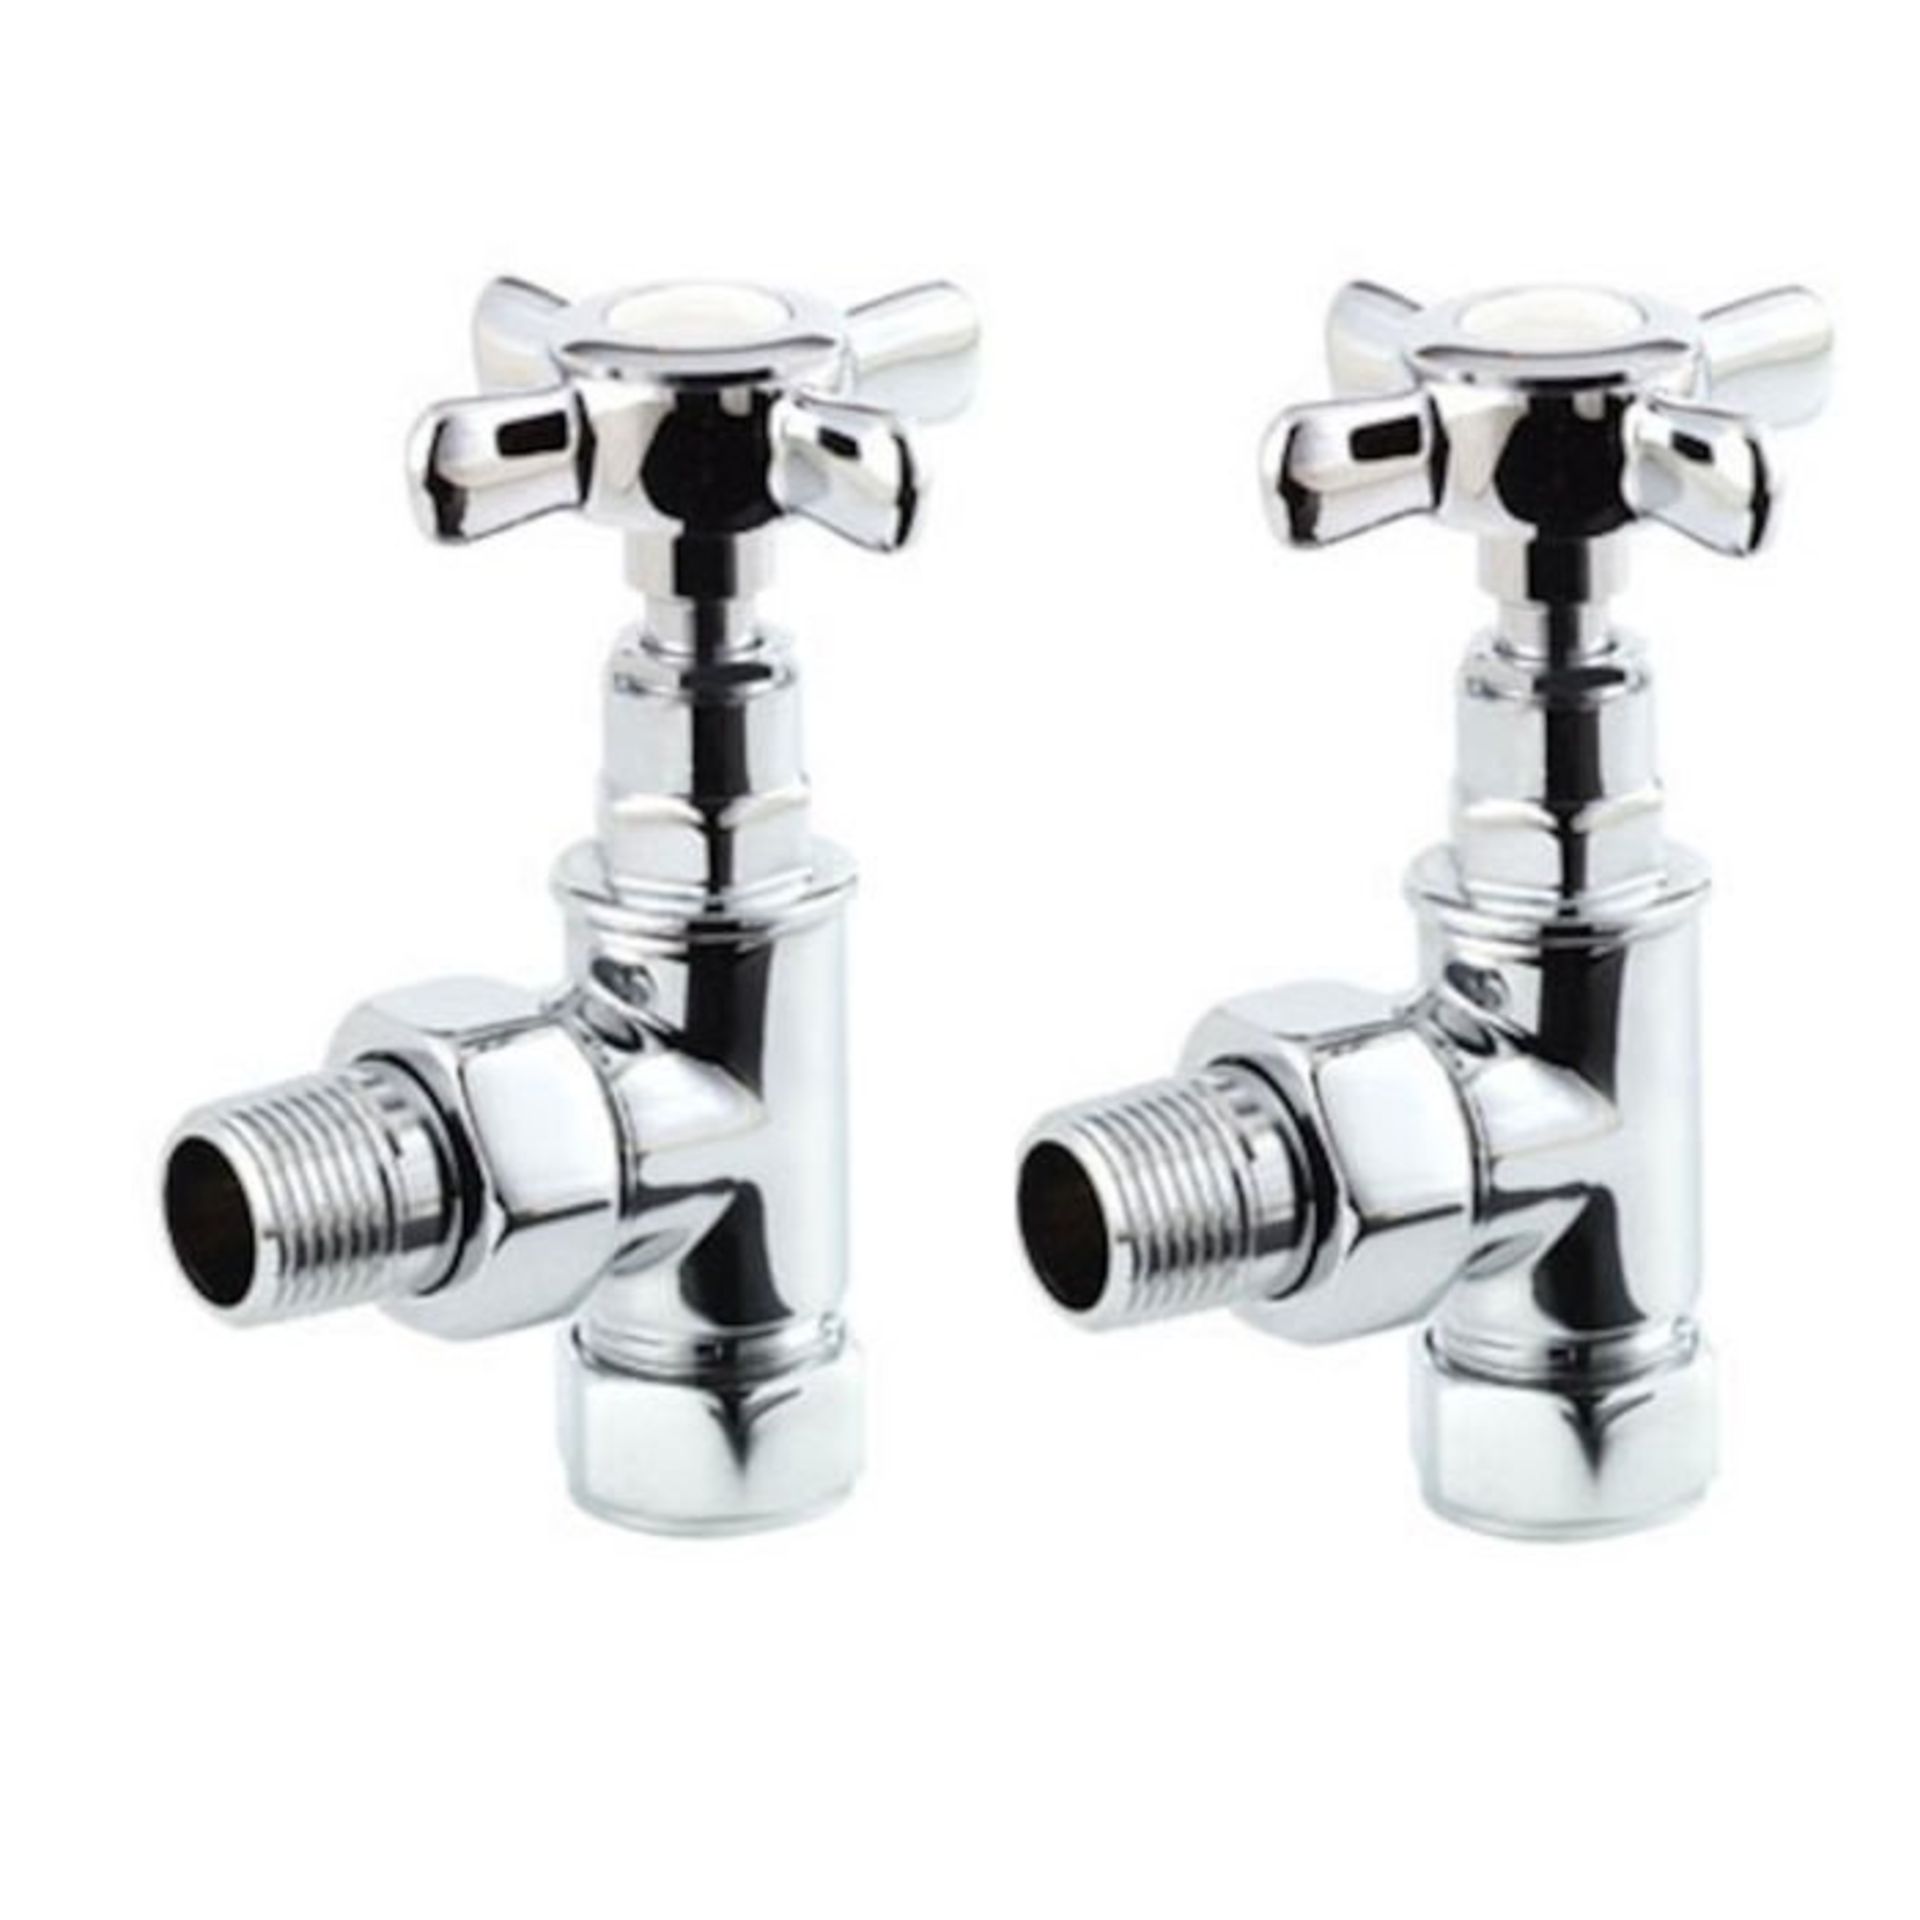 (L133) 15mm Standard Connection Angled Polished Chrome Radiator Valves. Chrome Plated Solid Brass